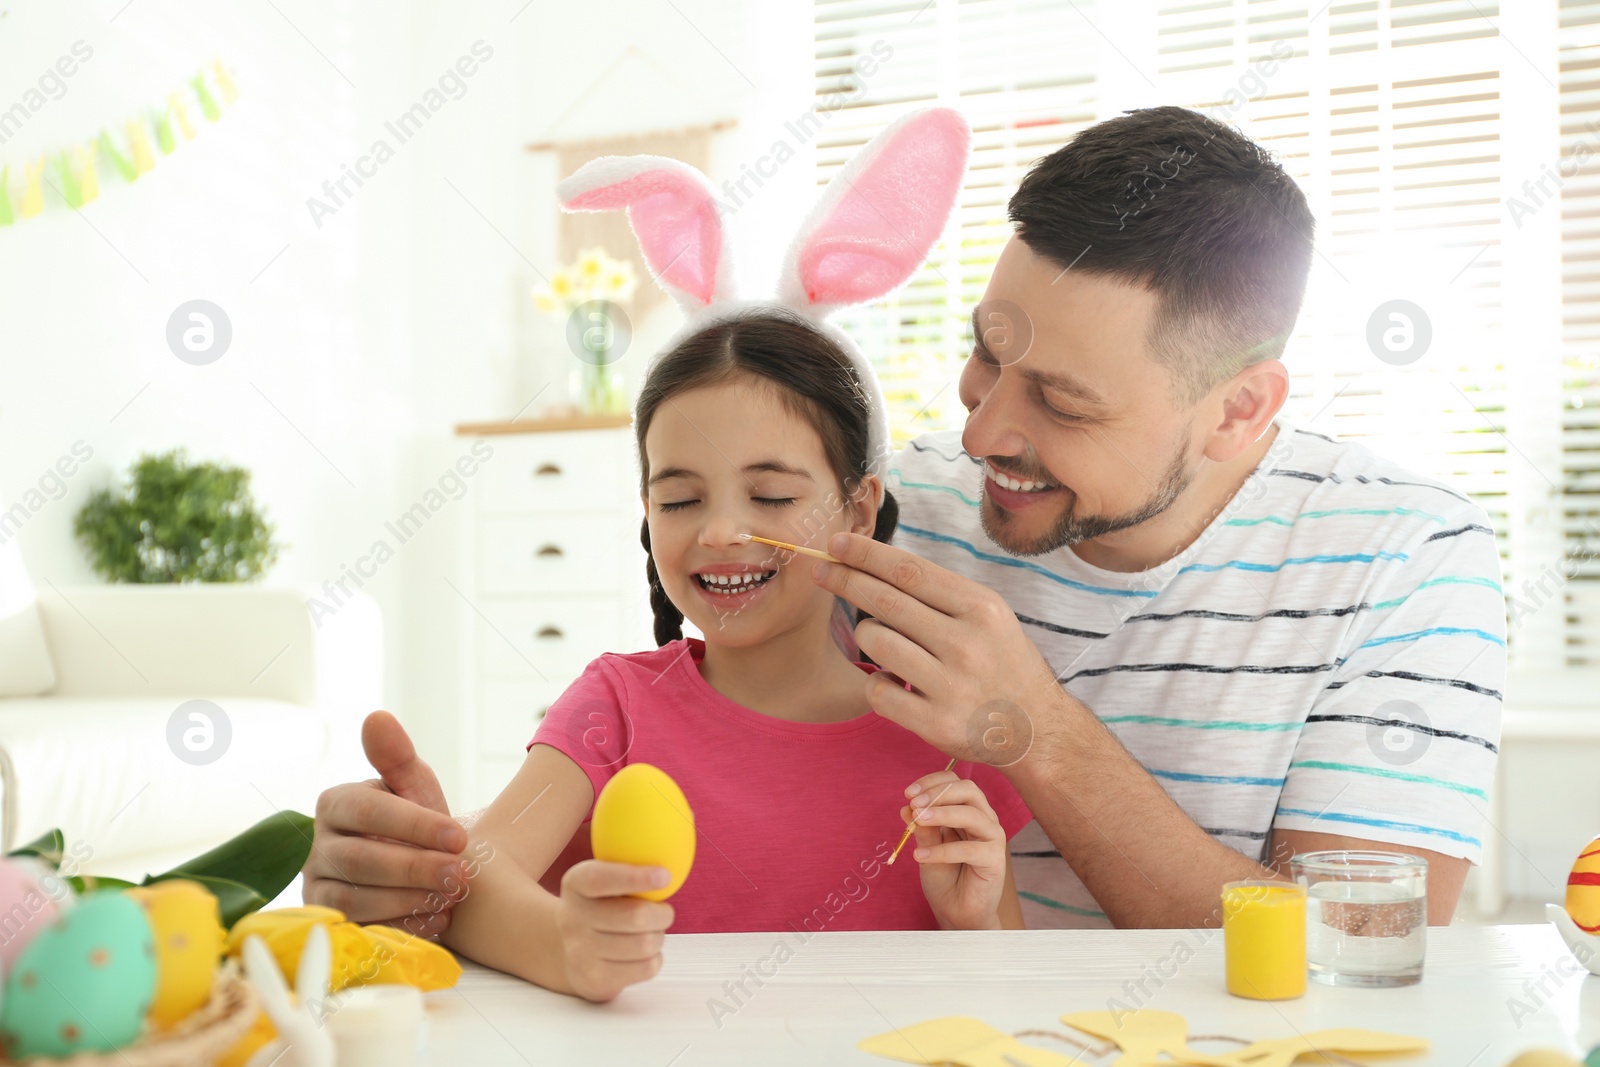 Photo of Happy daughter with bunny ears headband and her father having fun while painting Easter egg at home